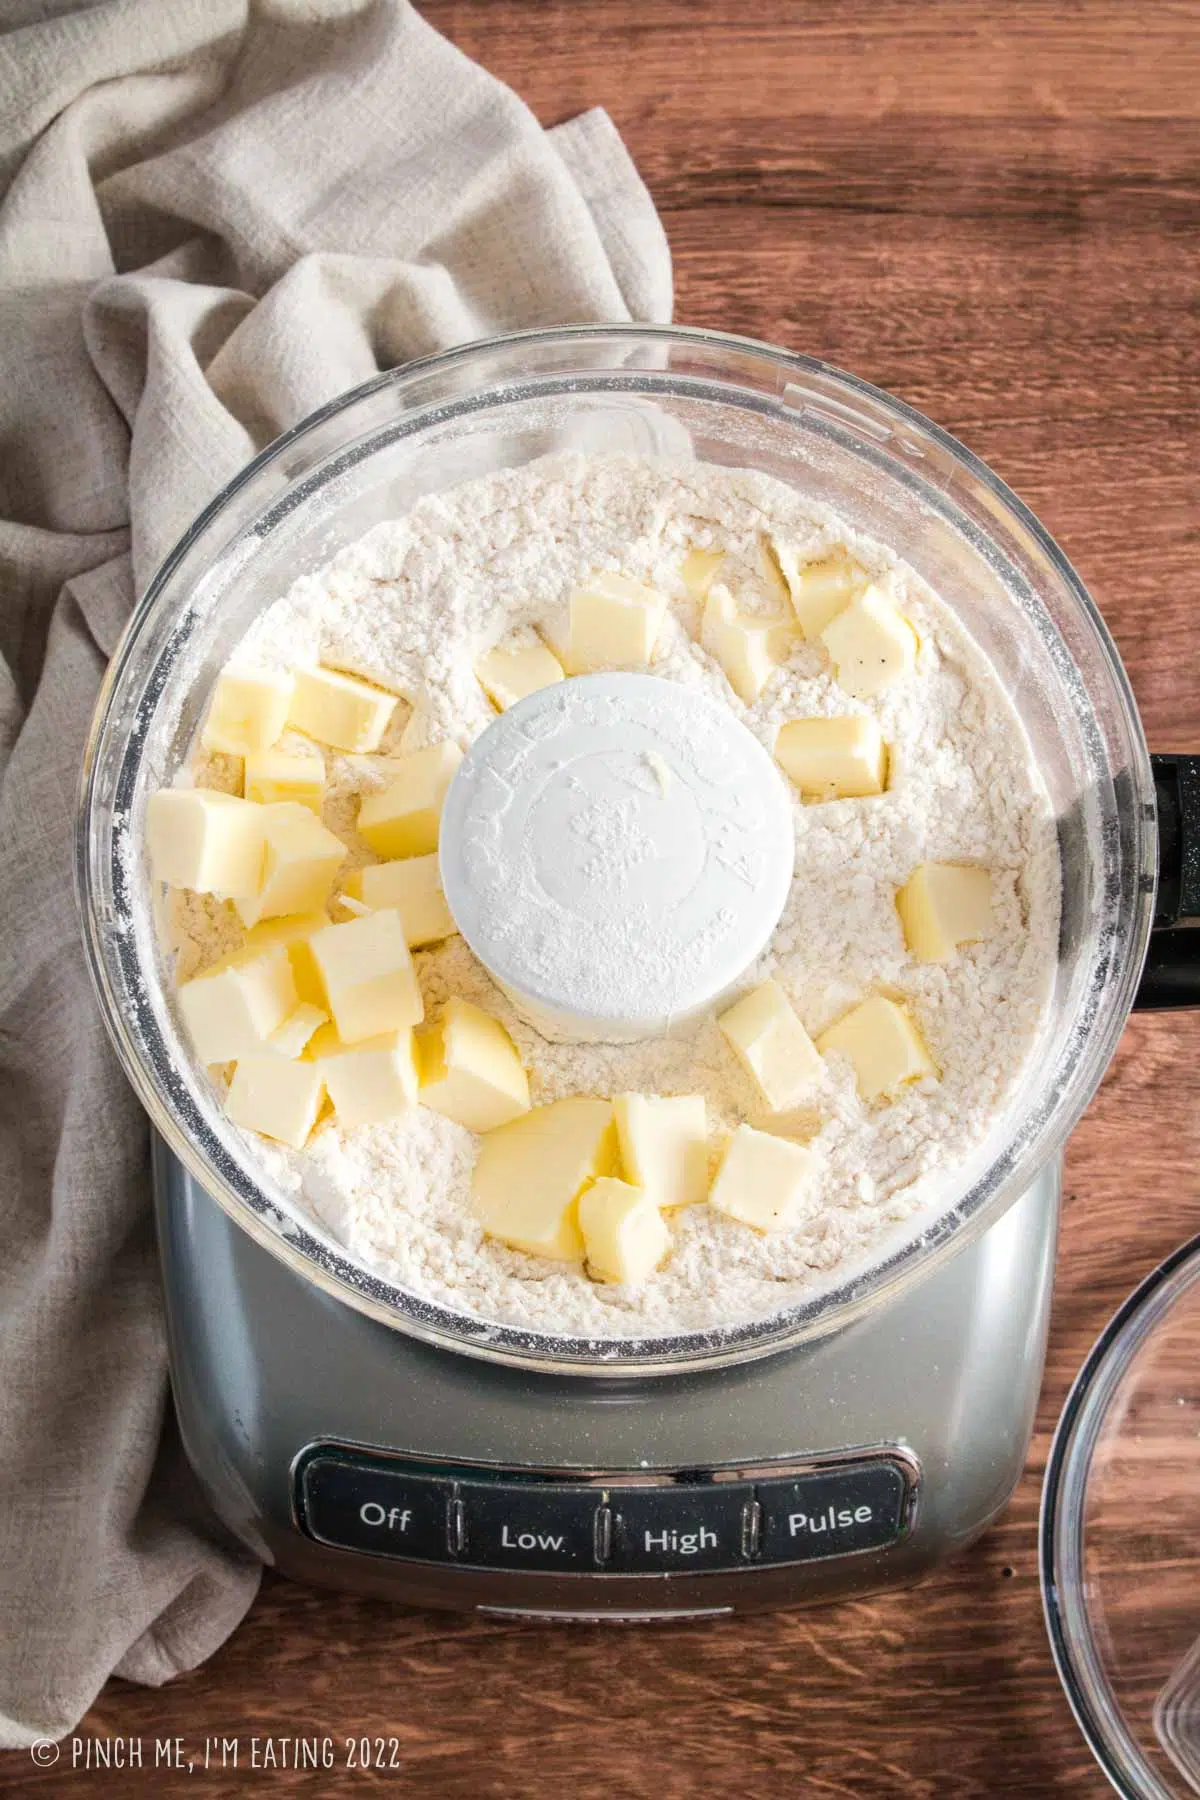 Overhead view of food processor with dry ingredients and cold butter cubes for making scones.